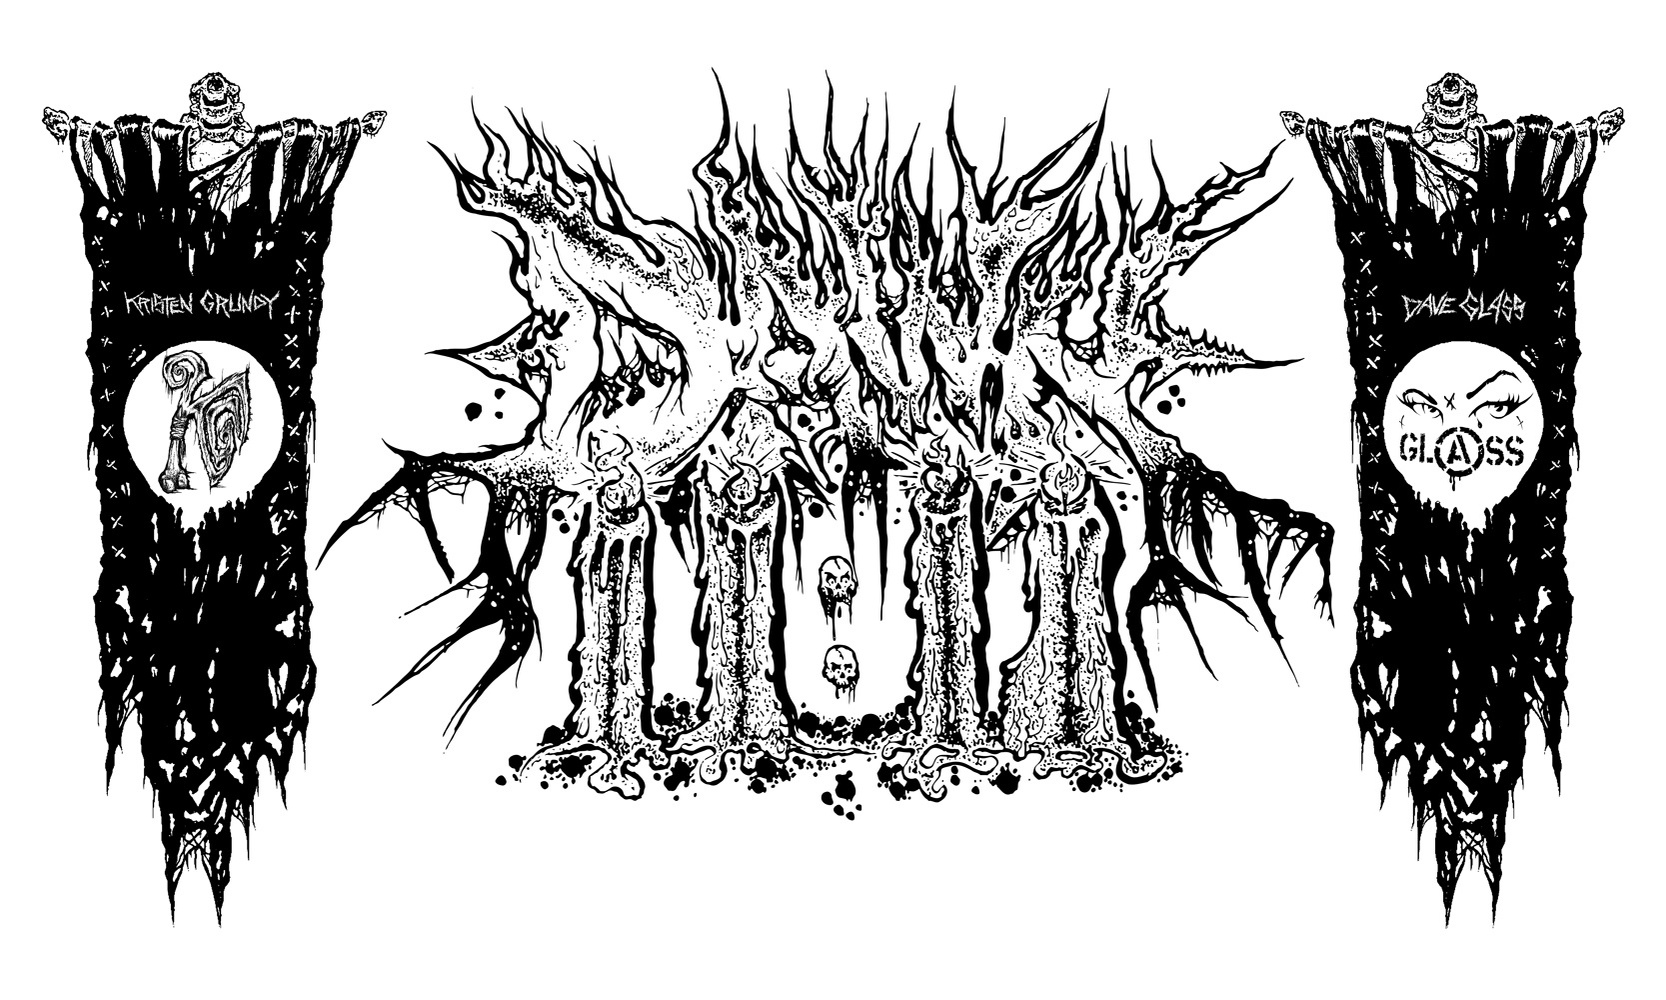 DAWN 11:11 Art Collective Banner dripping 11:11 candles dry rotted spinal cord and collar bone framed Kristen Grundy and Dave Glass hanging tapestries. Crust punk black metal hand drawn logo typography design by Dave Glass Art